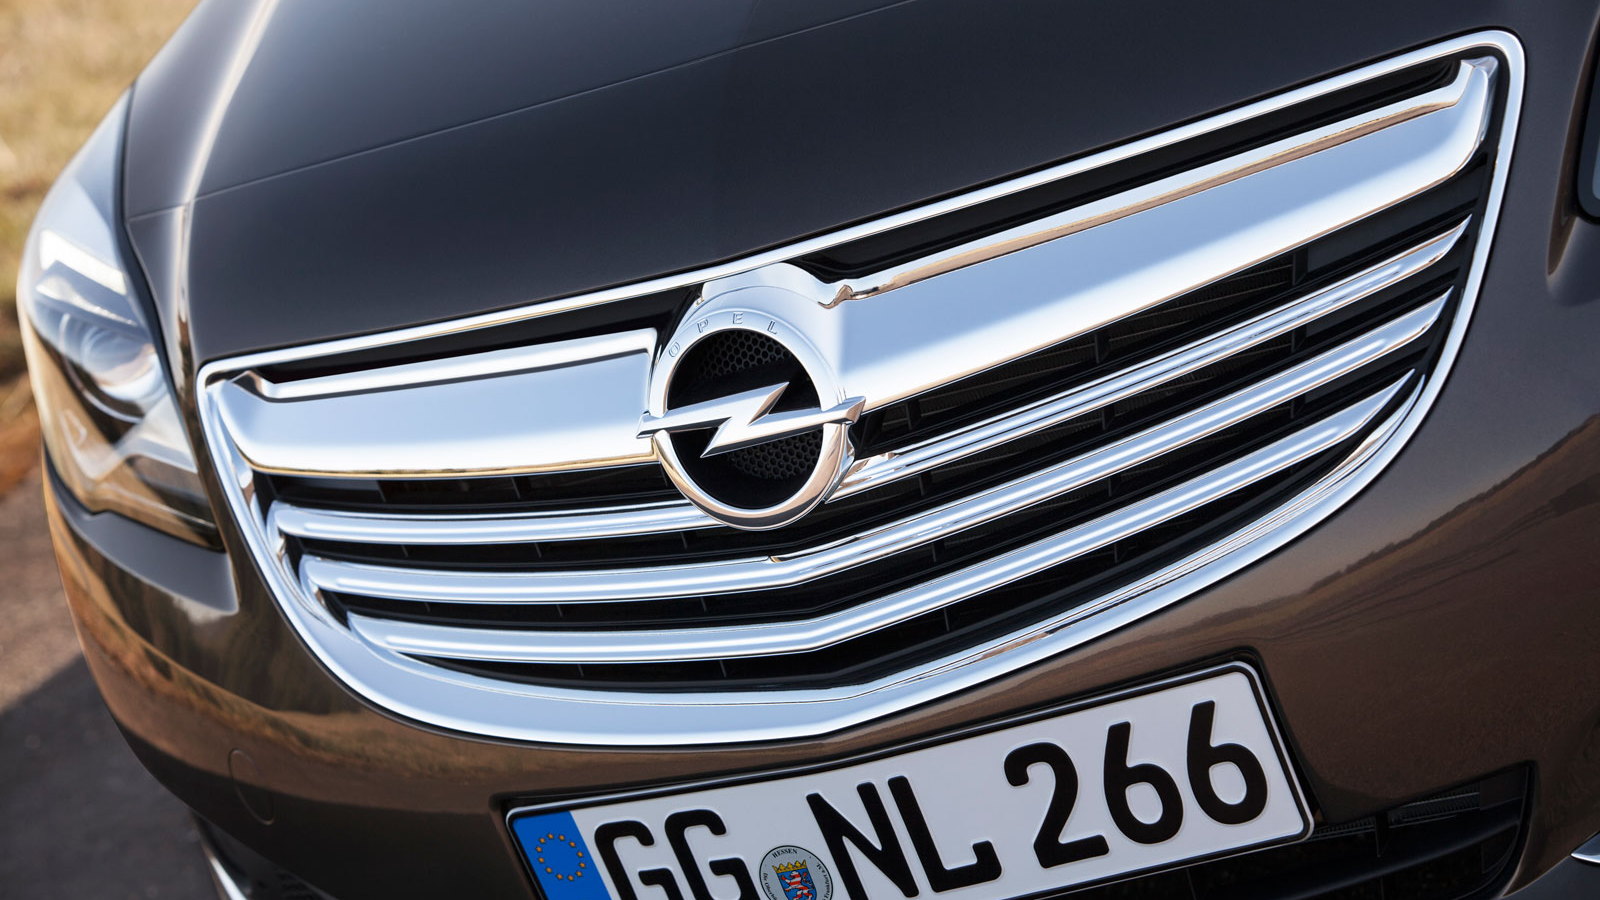 Opel Insignia Production To End This Year: Official